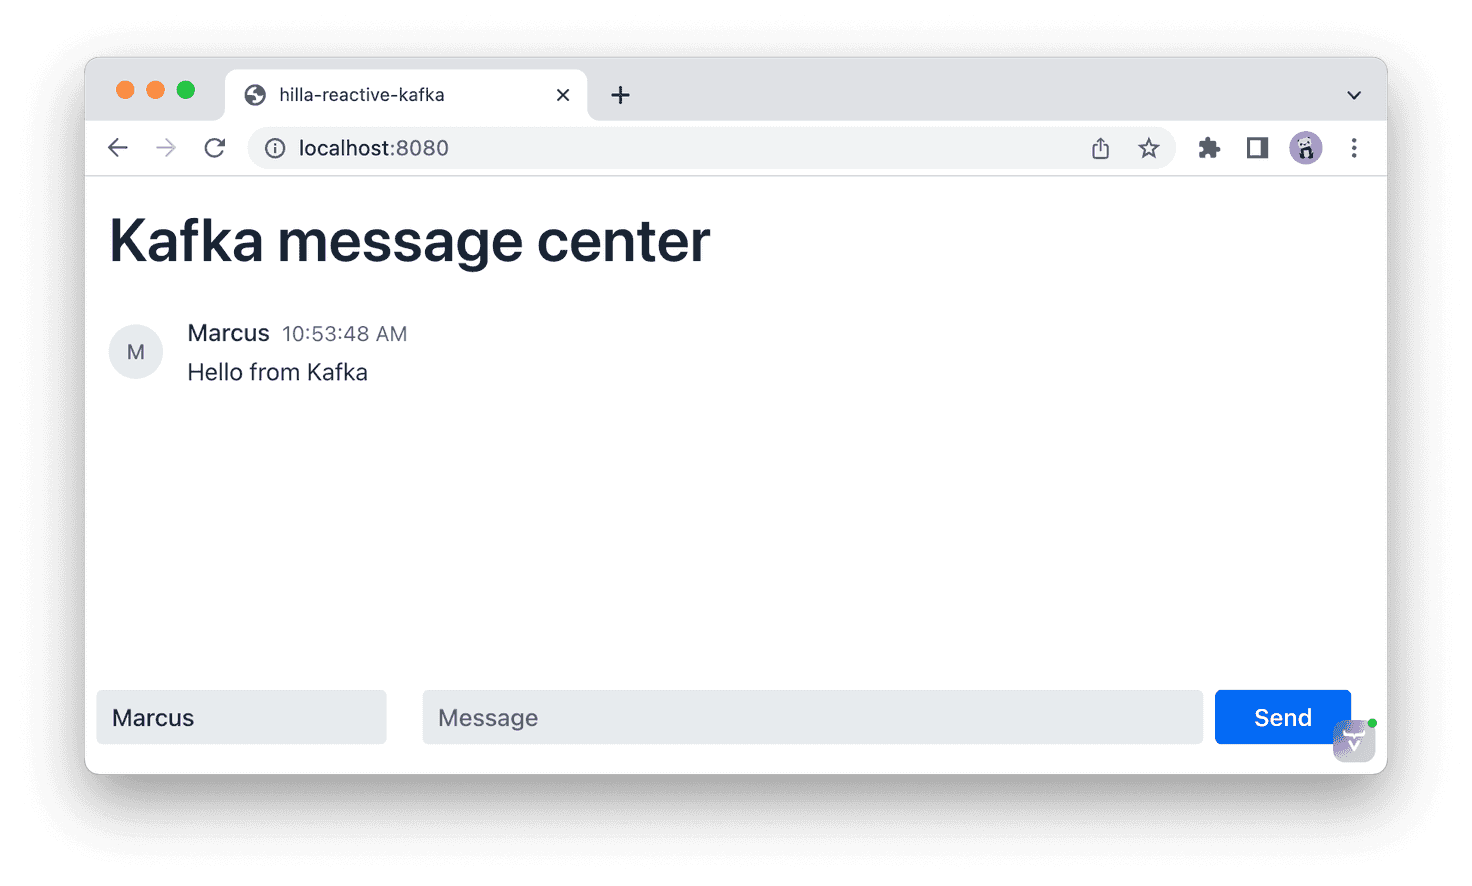 A browser window with an app showing one message "Hello Kafka". At the bottom of the window, there are two inputs, one for name and one for message, and a button for sending messages.